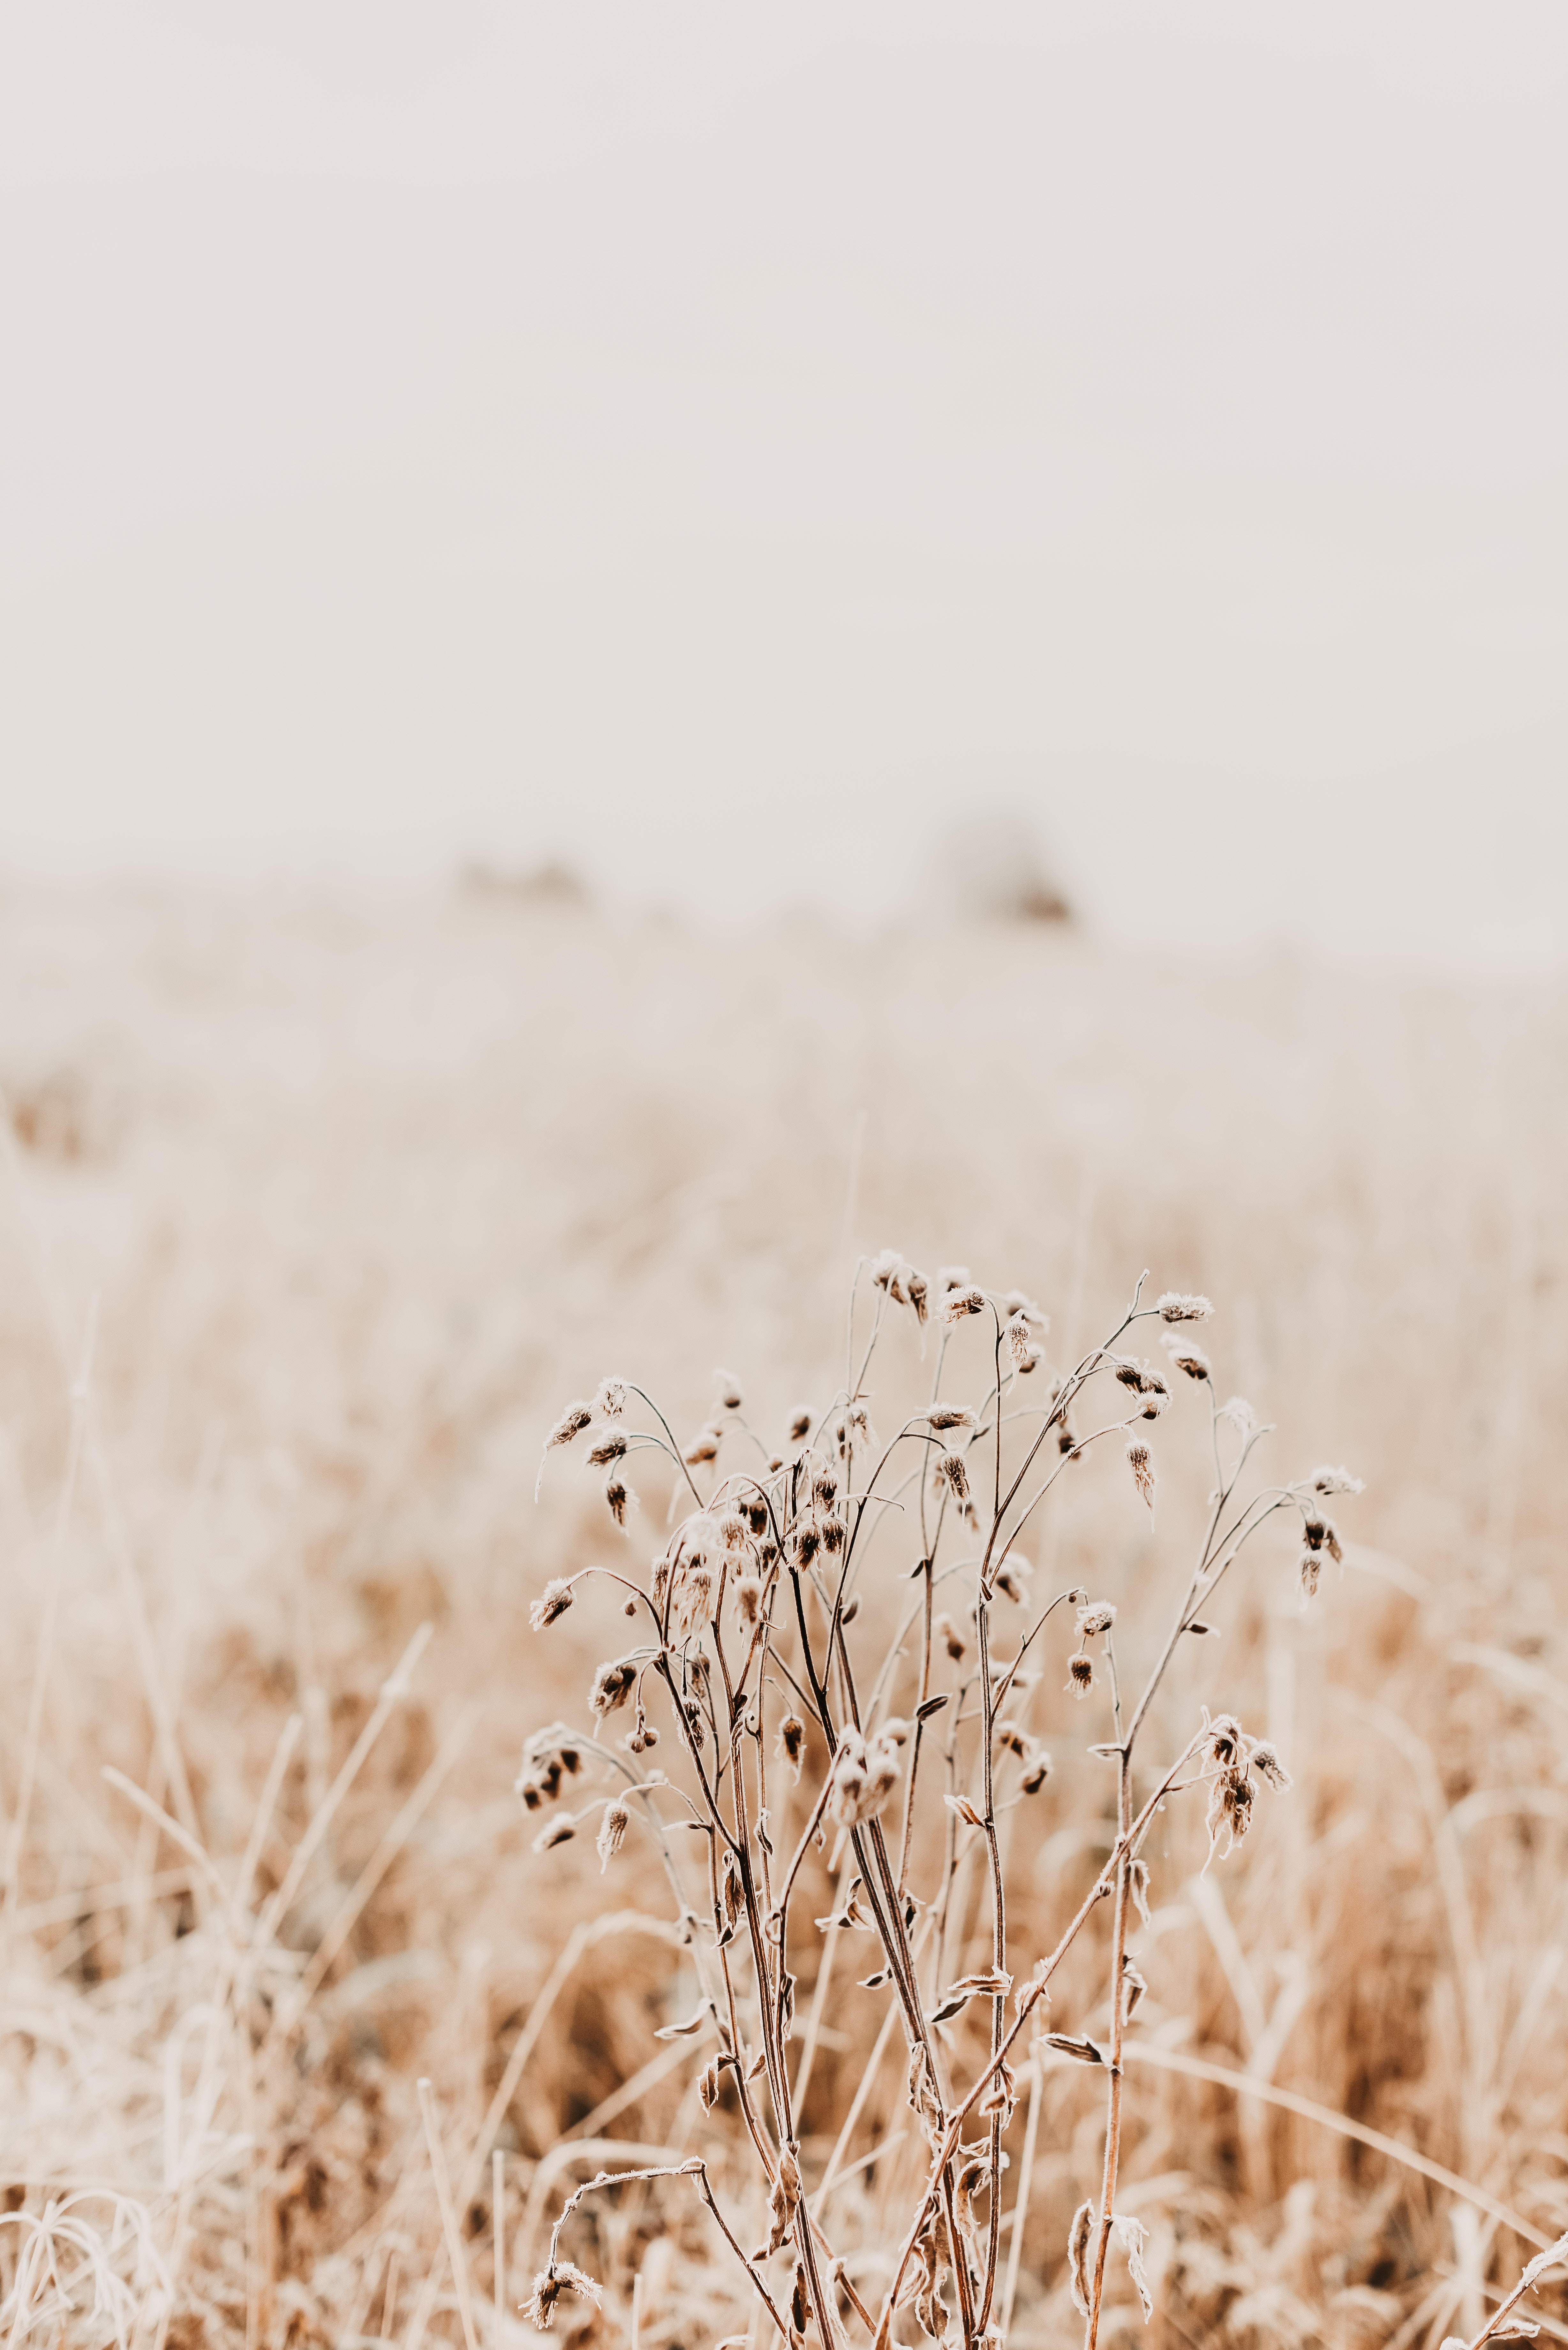 dry, nature, grass, plant